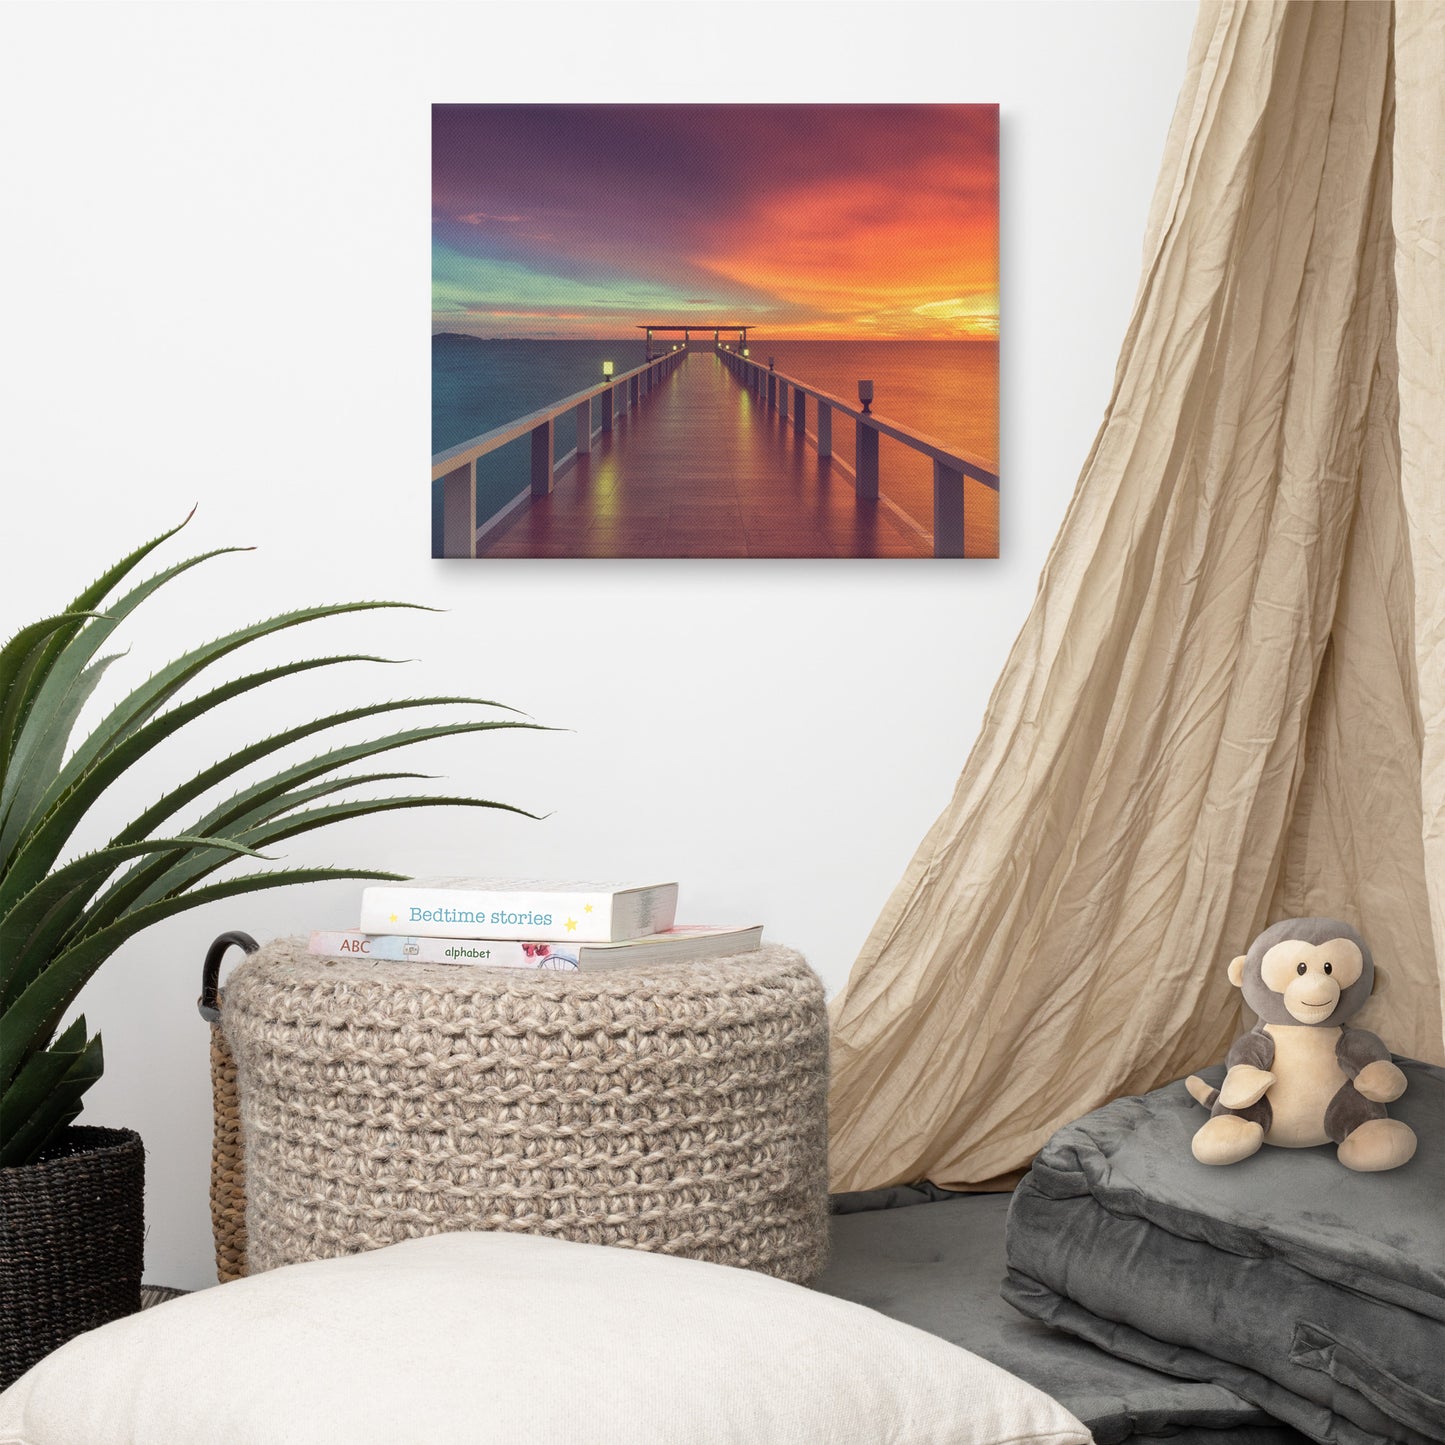 Wall Hanging Decor Bedroom: Surreal Wooden Pier At Sunset with Intrigued Effect Landscape Photo Canvas Wall Art Prints